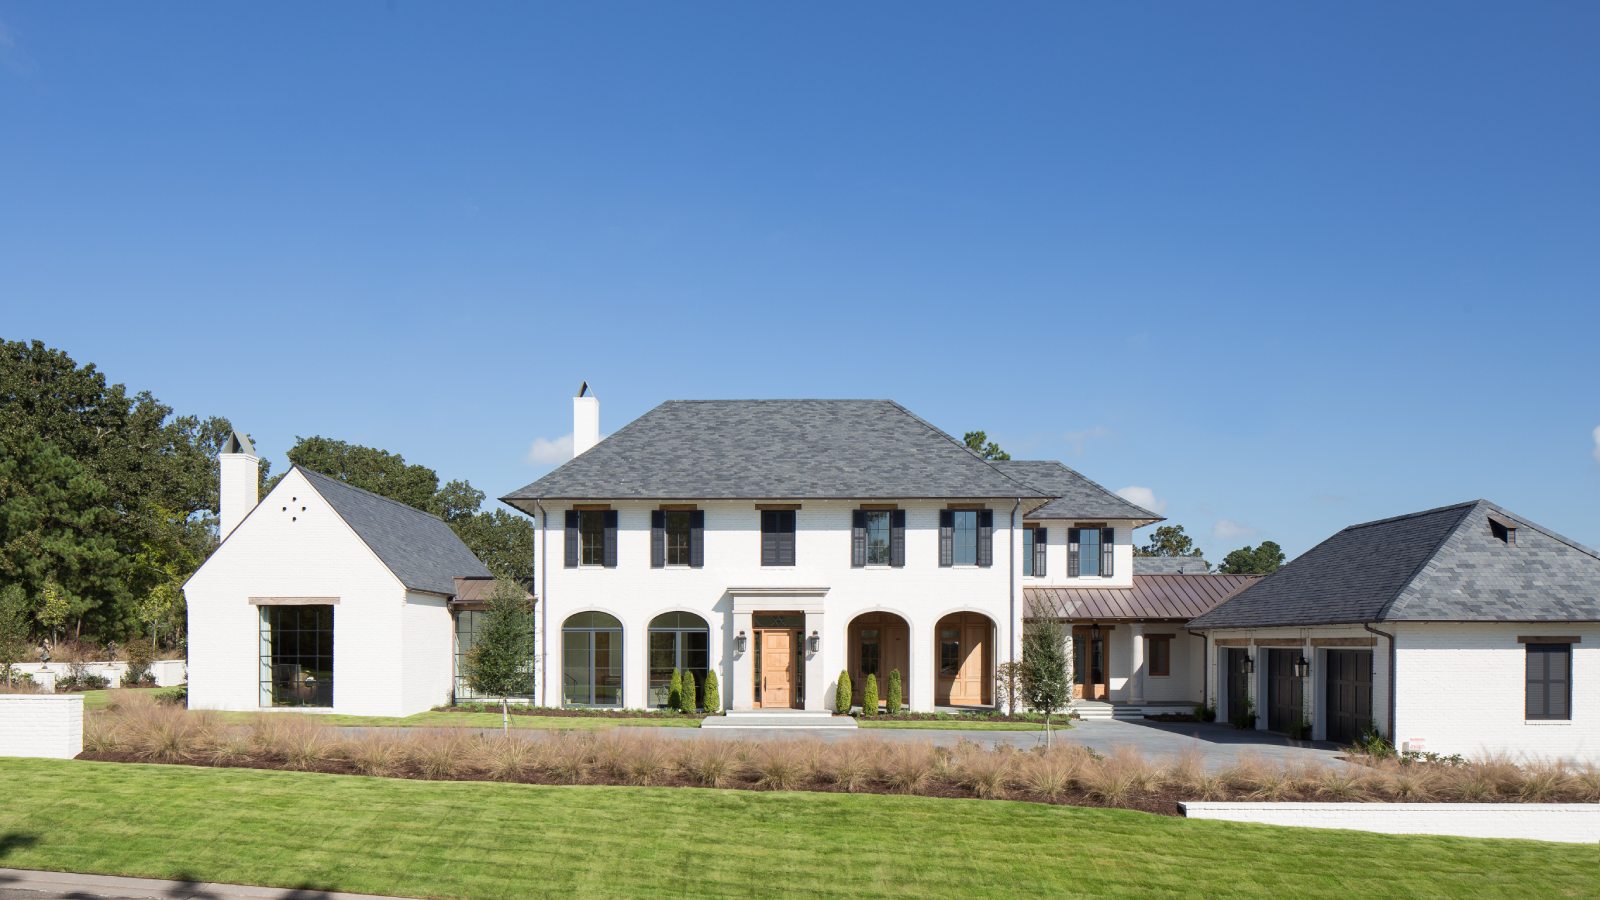 Exterior view of the front of French Influential, a custom home designed and built by Farmer Payne Architects.